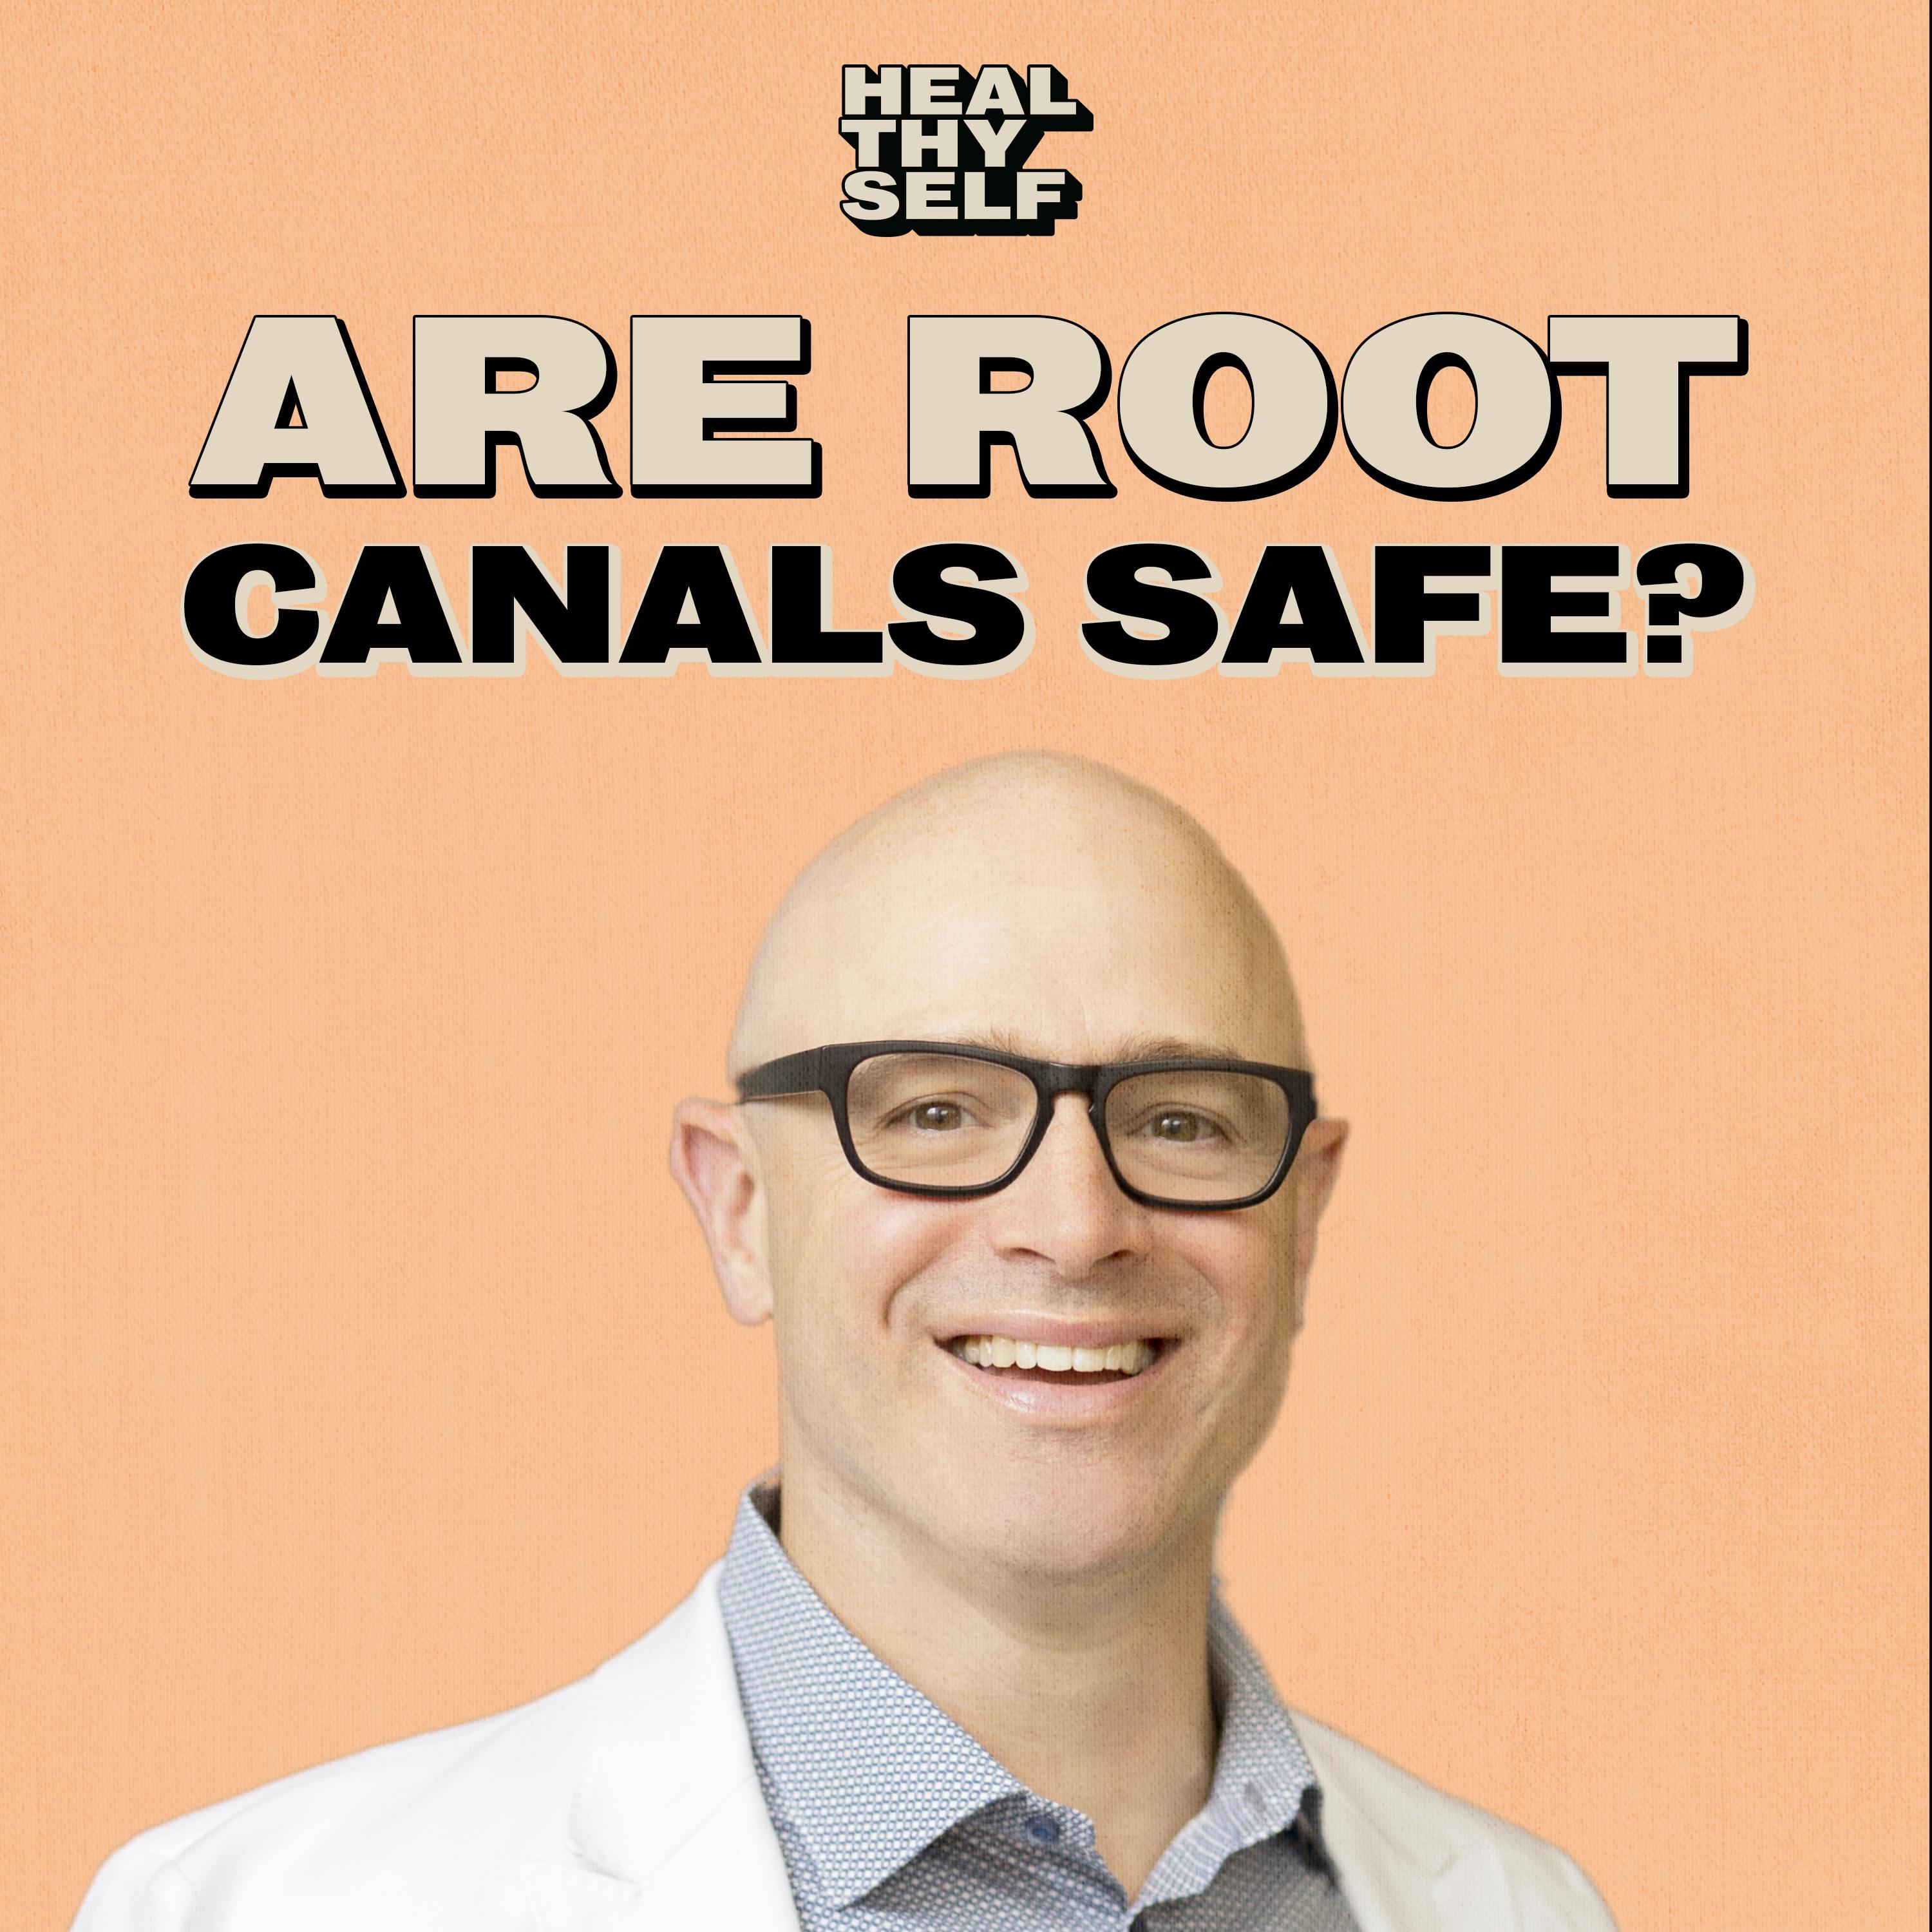 How to fix bloating and Dr. Kelly Blodgett explains the dangers of Root Canals